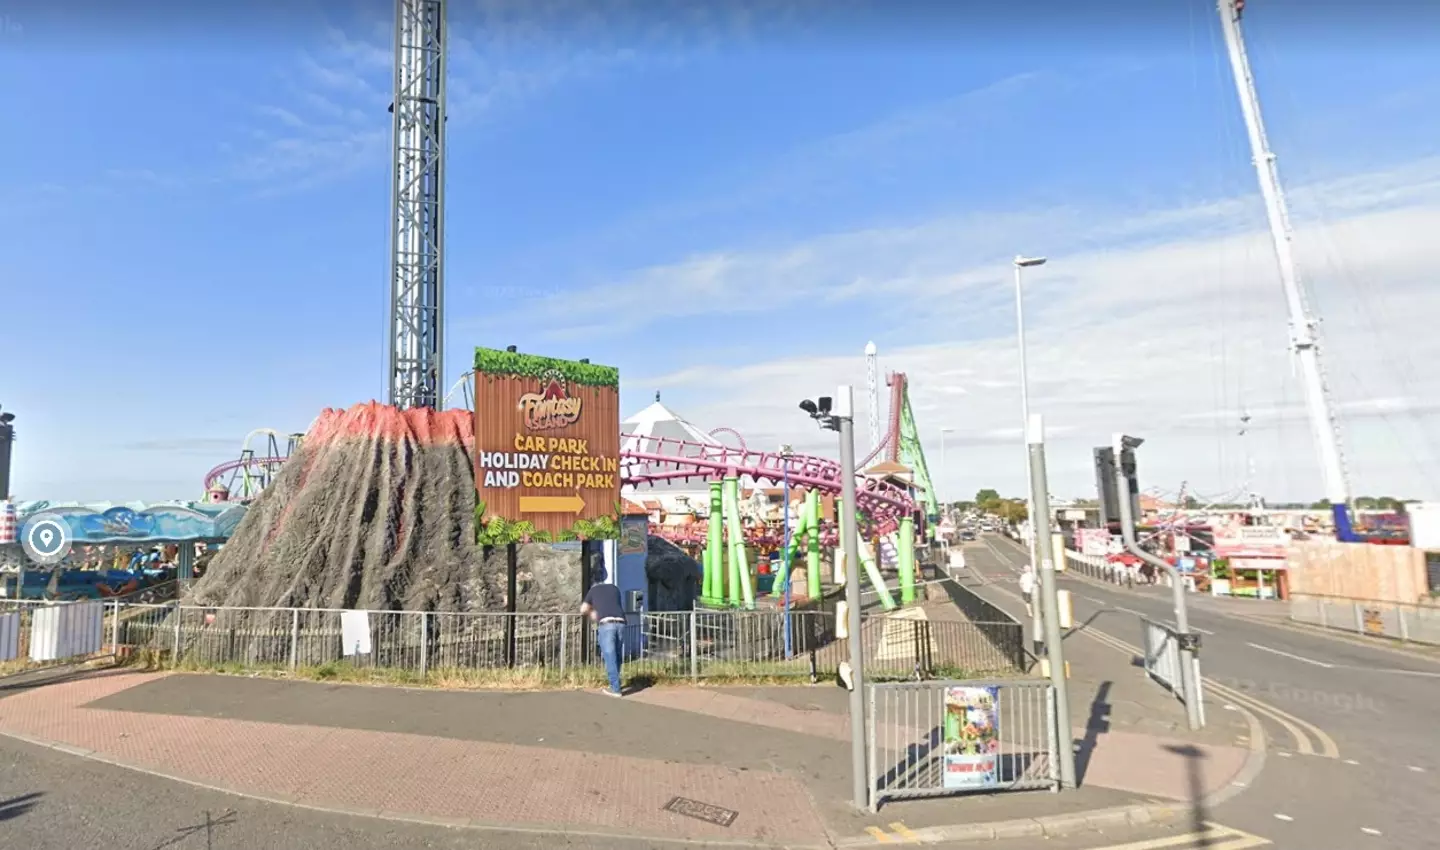 Rollercoasters at Fantasy Island reduced their access whilst an investigation was carried out.